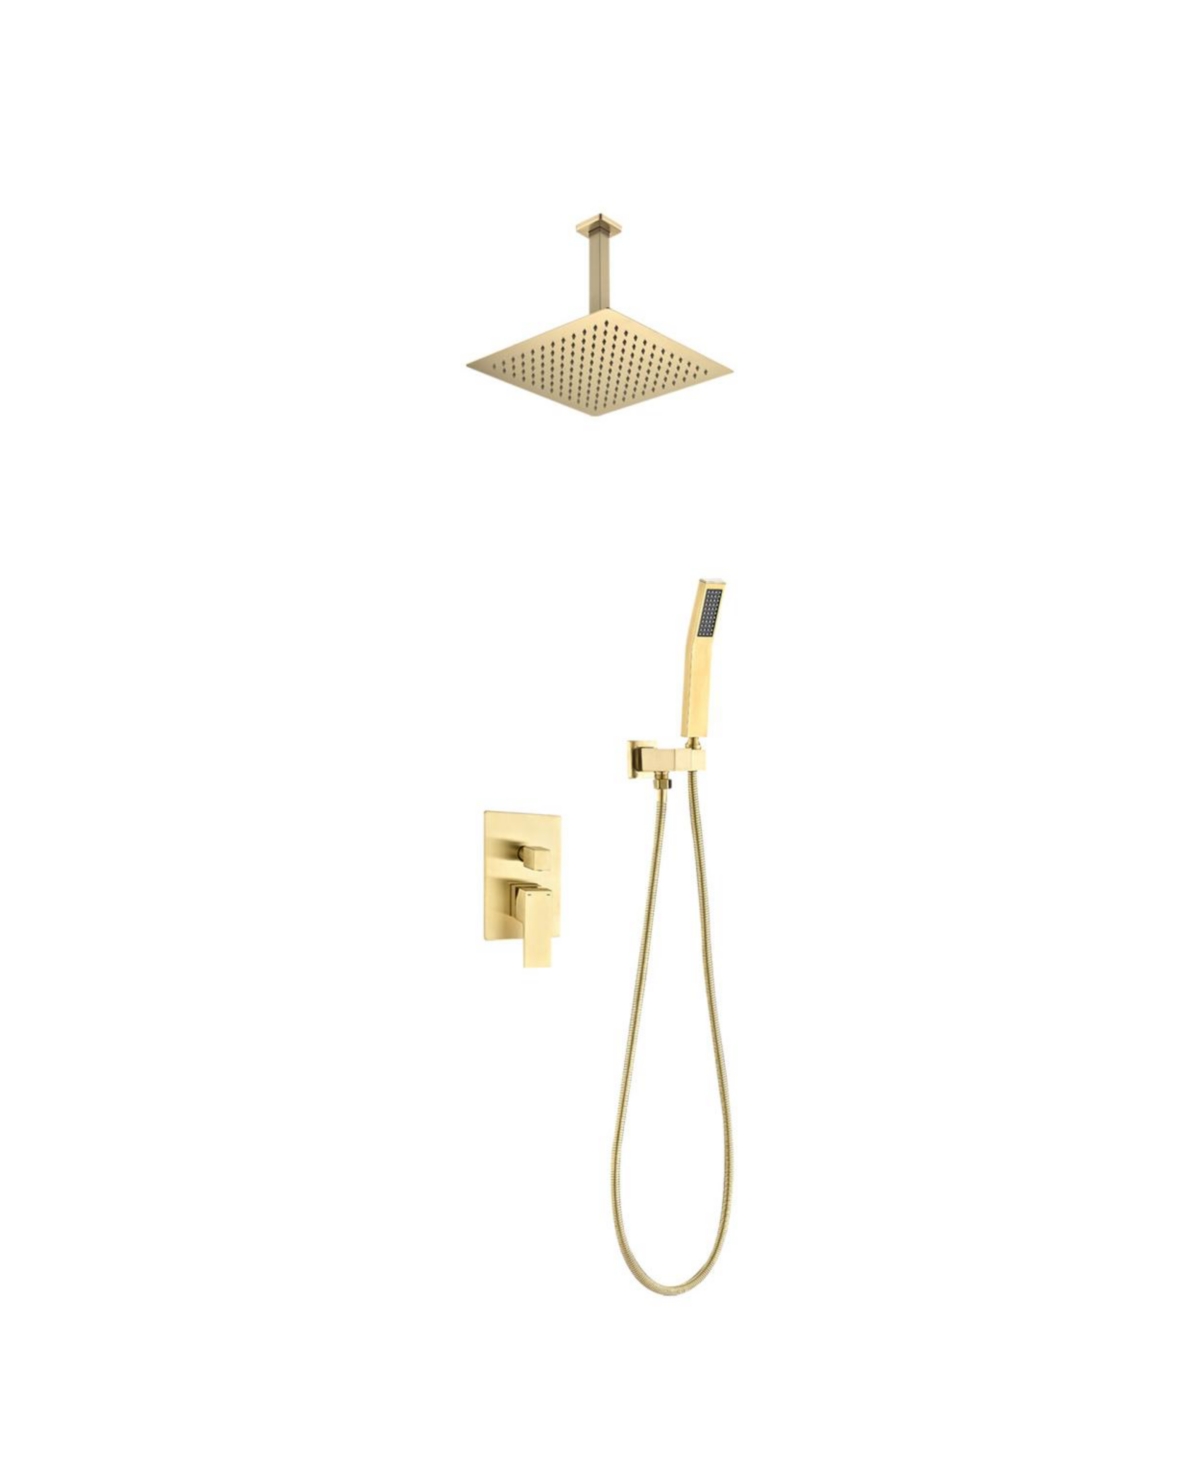 Ceiling Mounted Shower System Combo Set With Handheld And 12" Shower Head - Gold